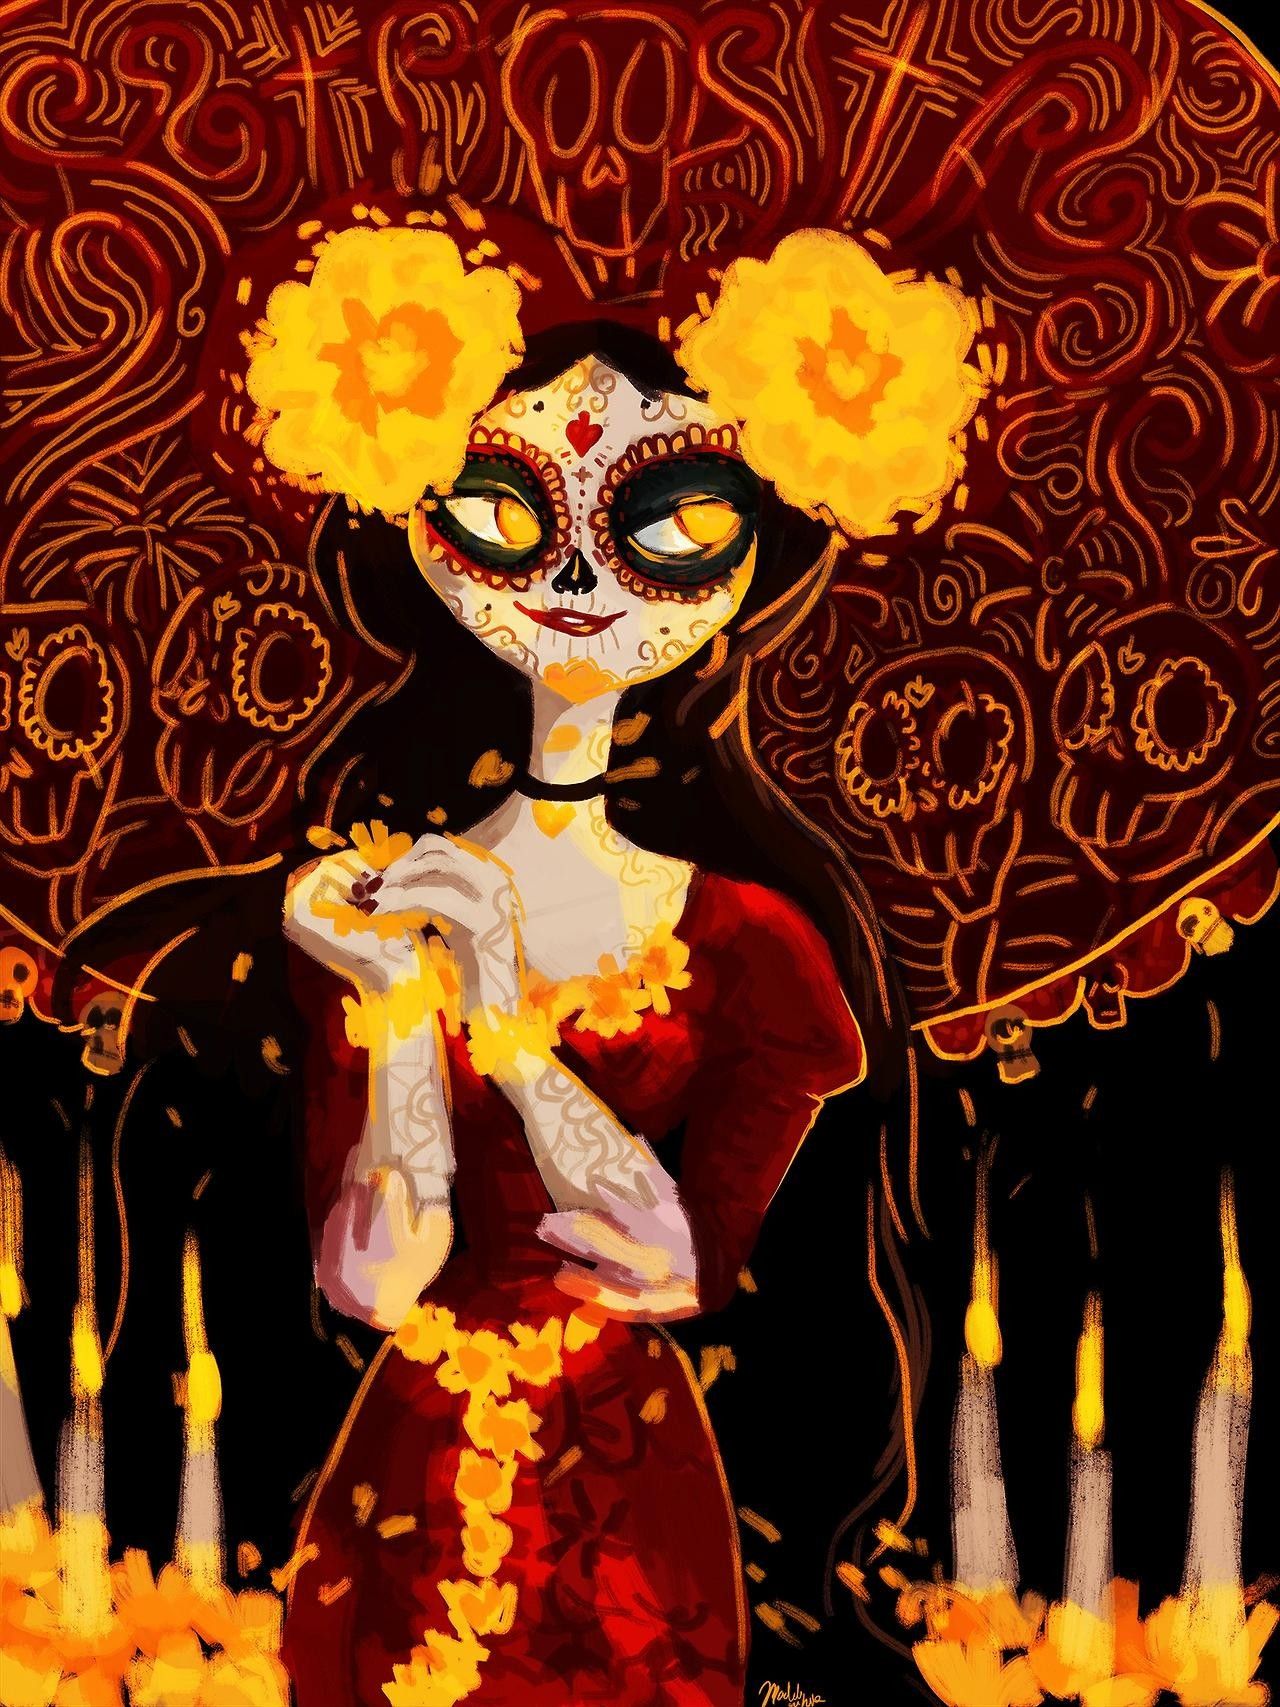 Background Day Of The Dead Wallpaper